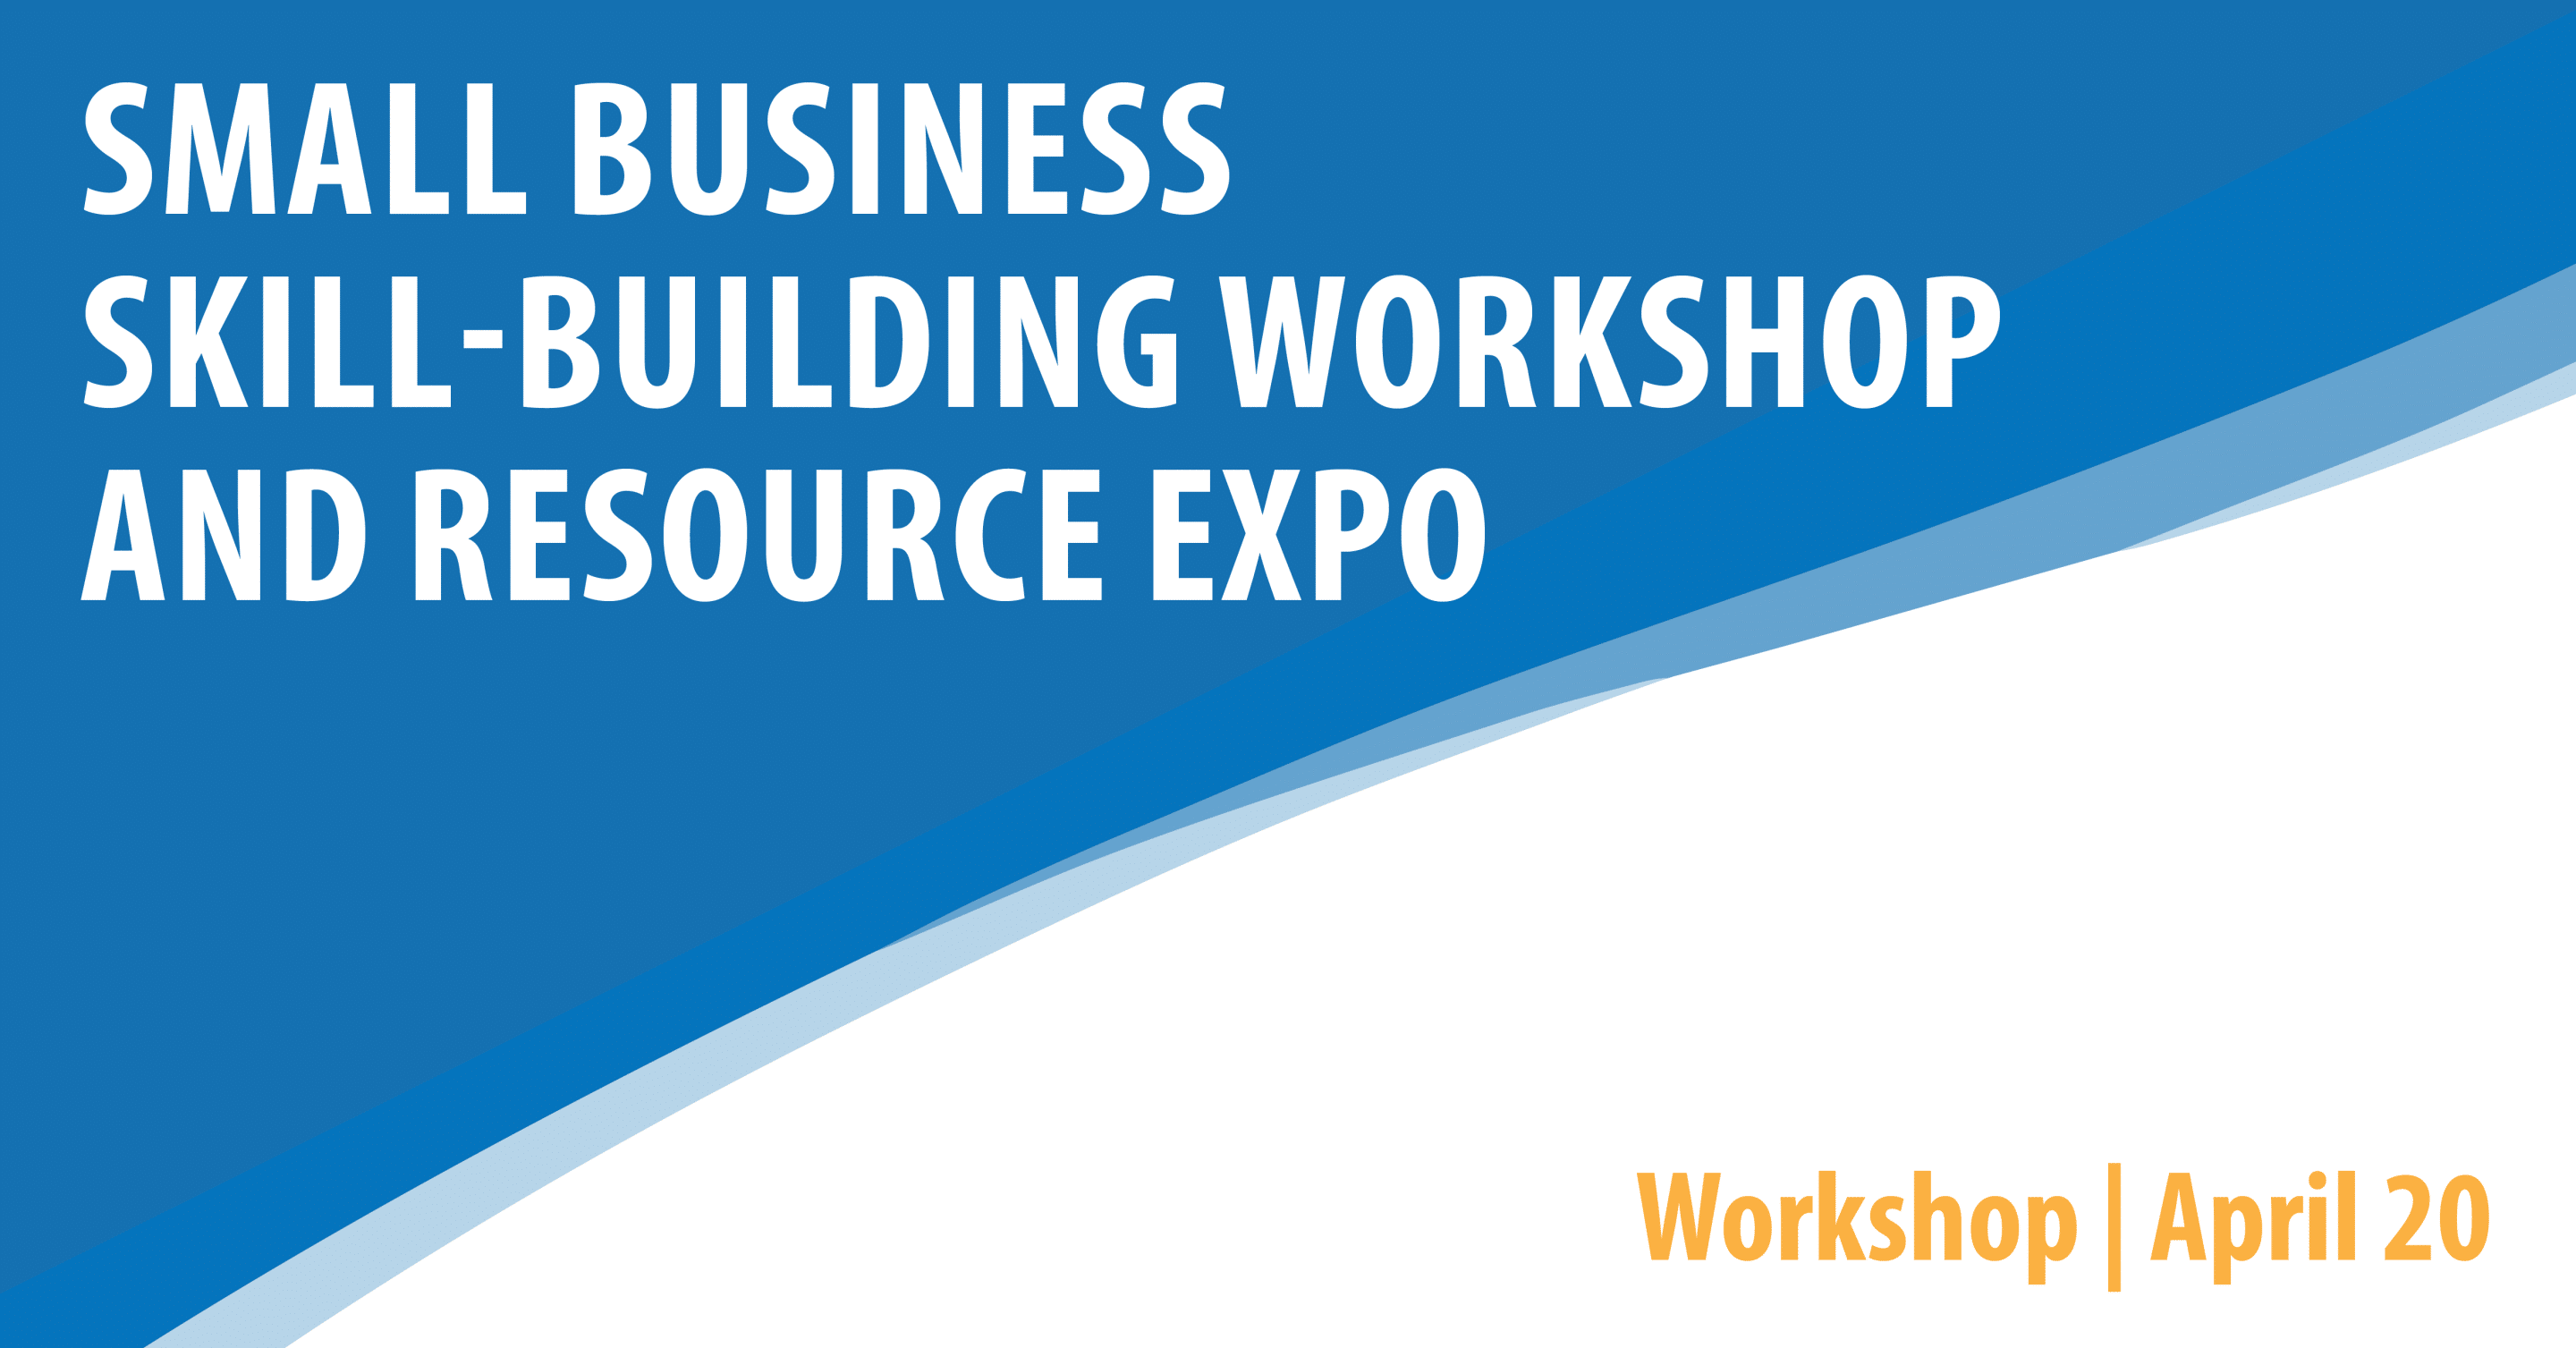 Small Business Skill-Building Workshop and Resource Expo